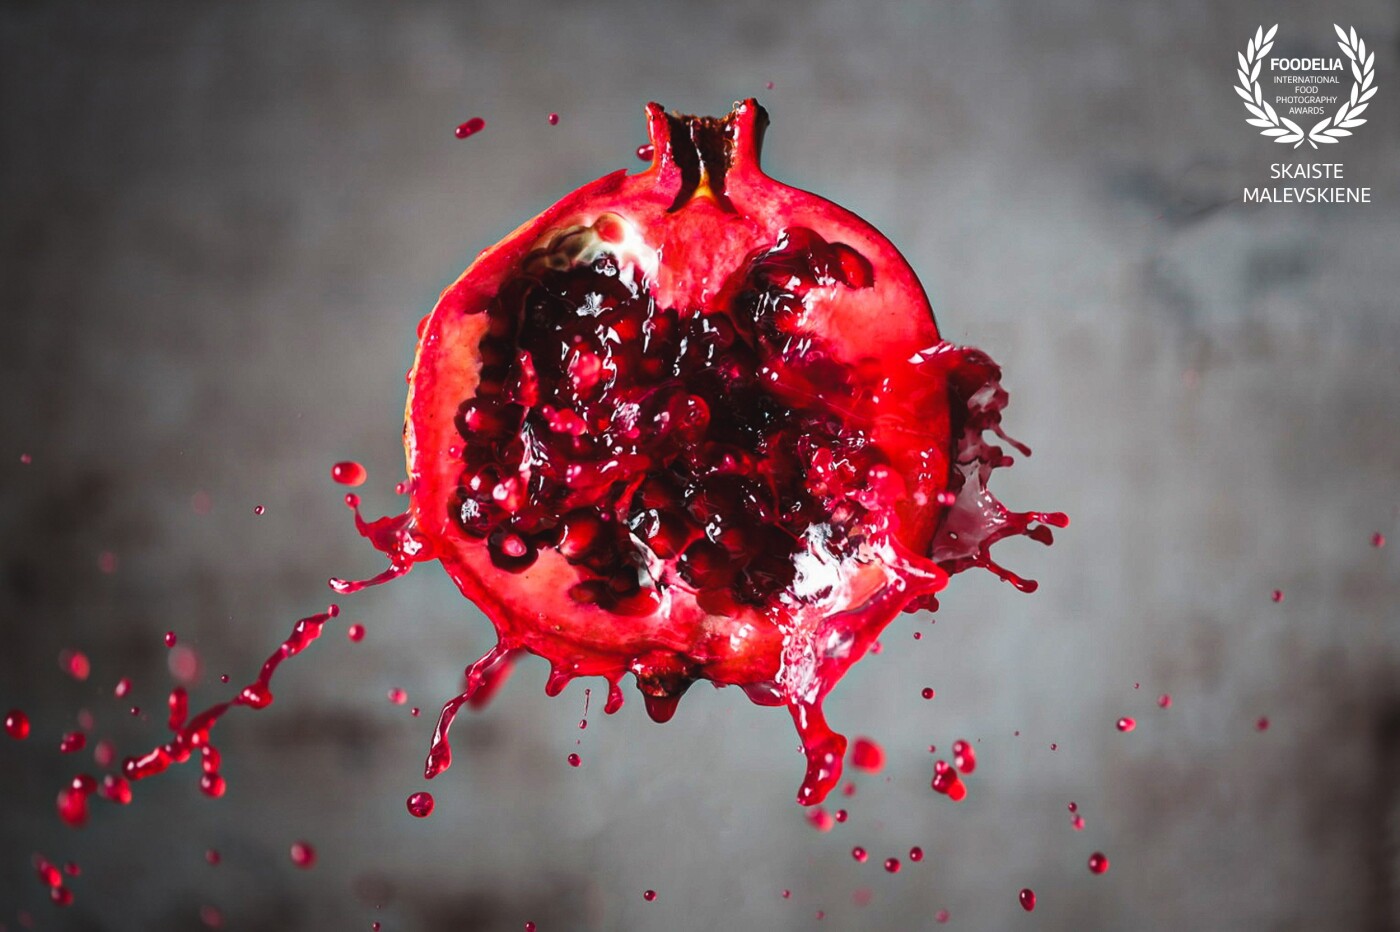 I have challenged myself to take a different picture of pomegranate every day for 30 days, capturing it’s beautiful color, texture, shapes, and energy. This is day 4. Explosion. 